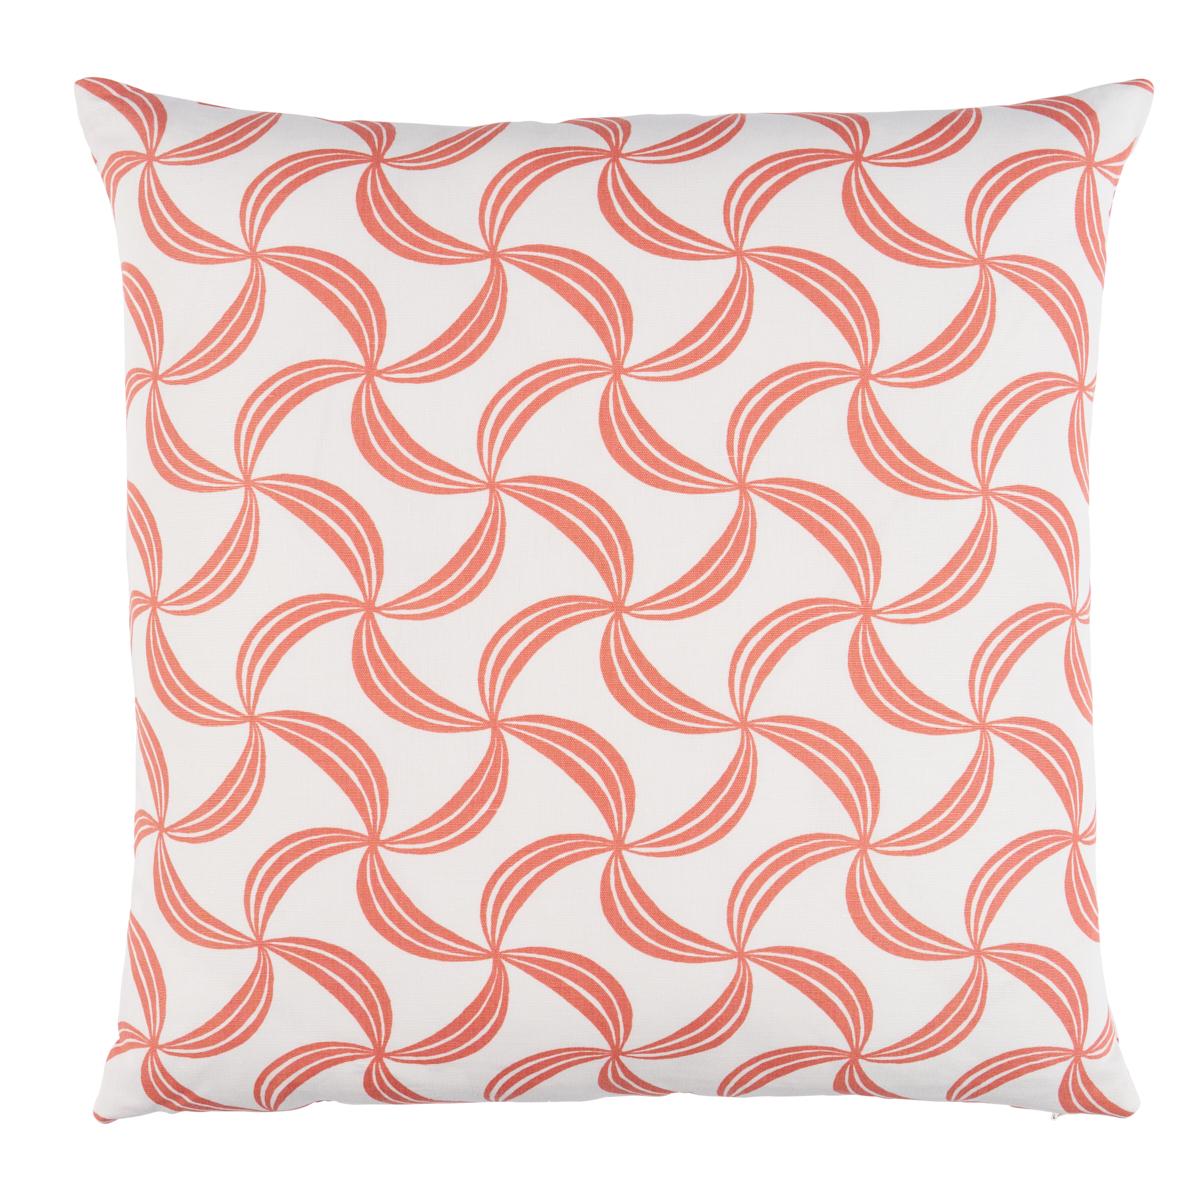 Ambrosia Pillow in Coral 22 x 22" For Sale